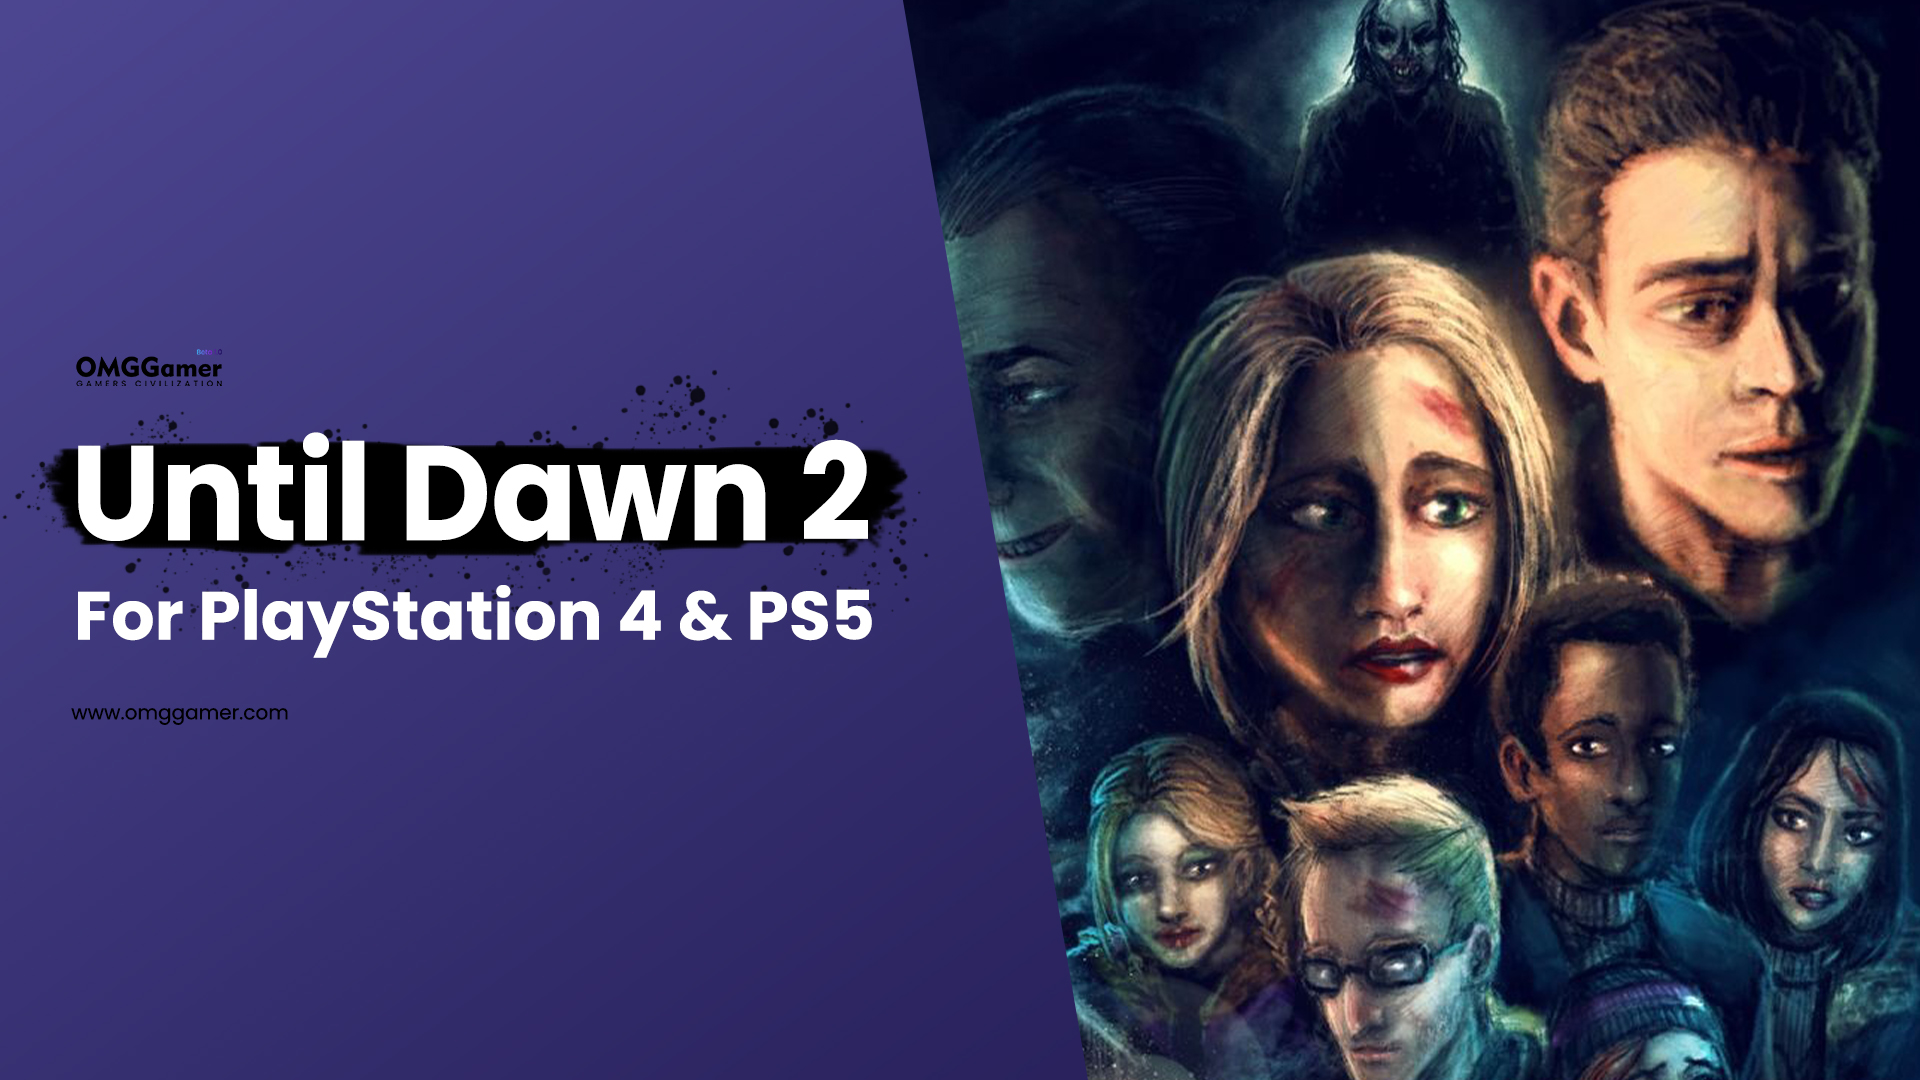 Until Dawn 2 for PlayStation 4 & PS5